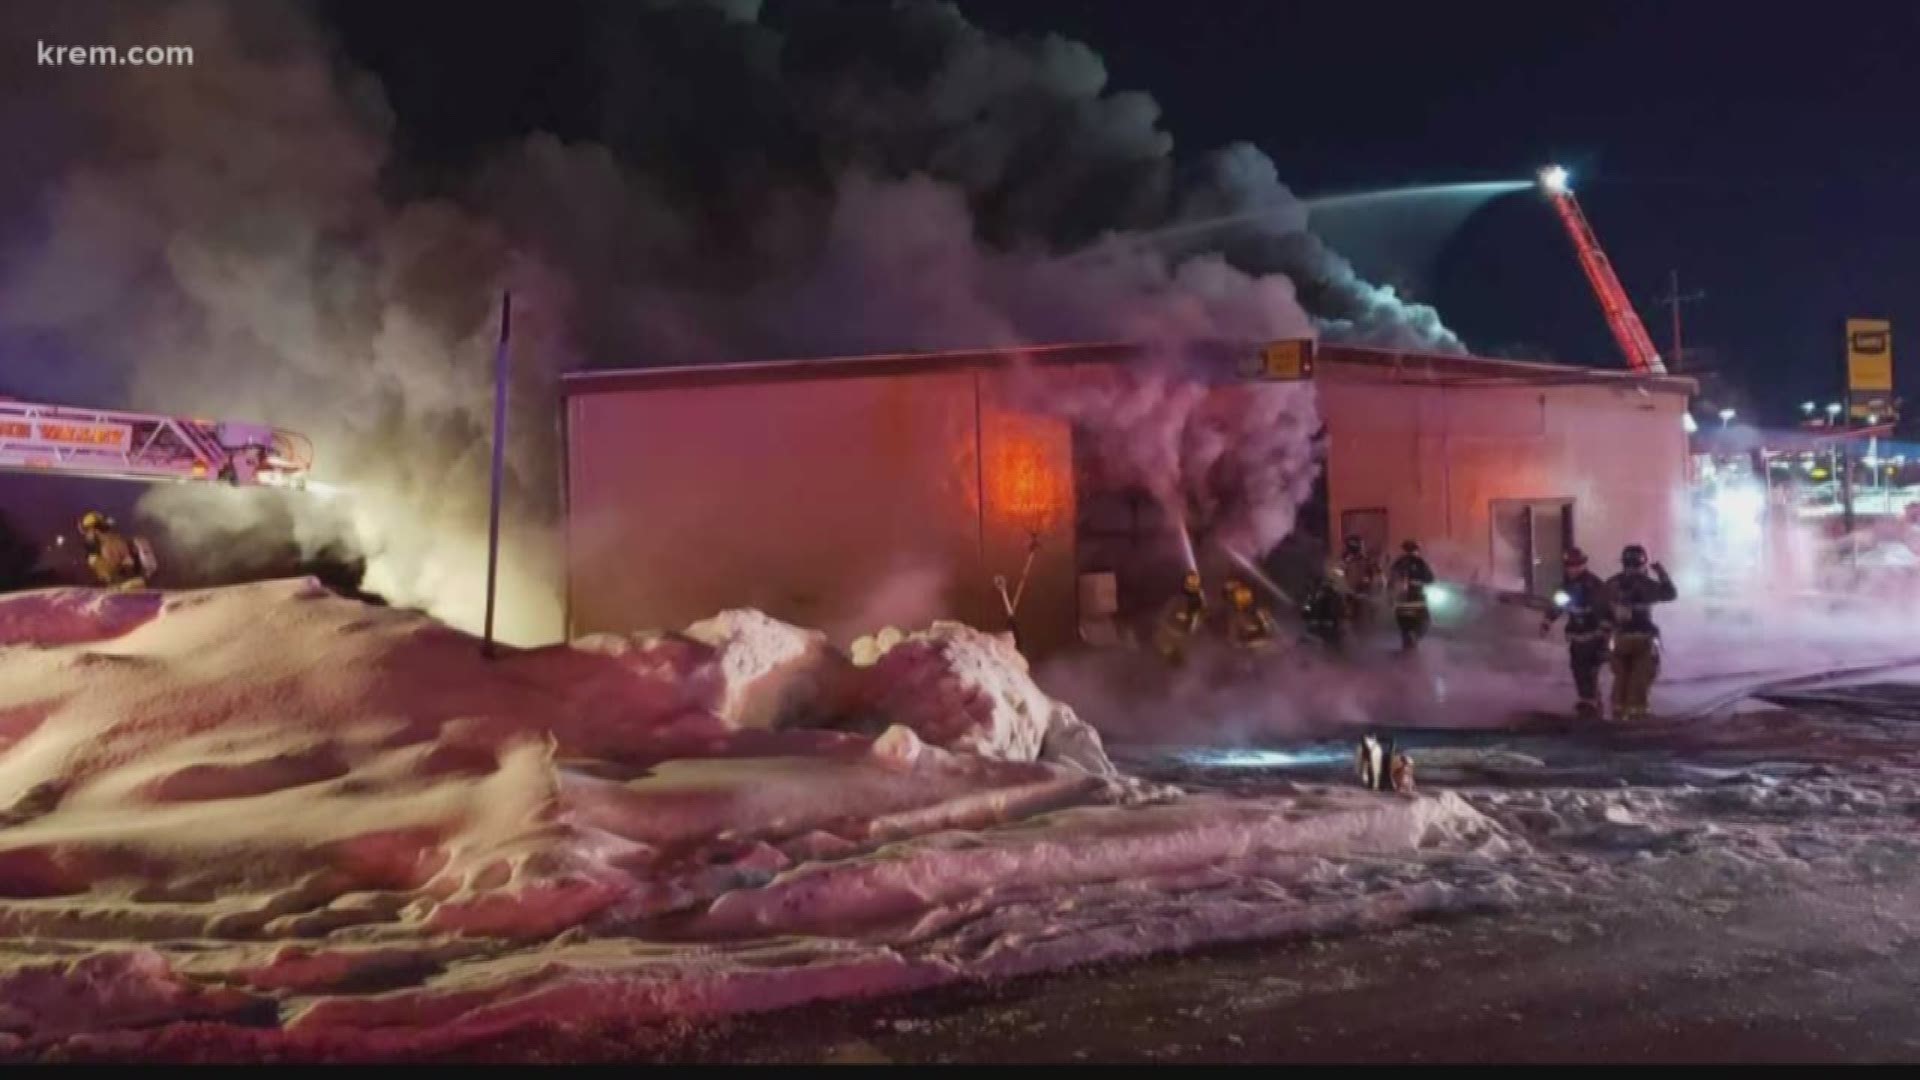 A Spokane Valley firefighter was injured while battling a blaze at a paint store in Spokane Valley on Sunday night. The firefighter has since been released from the hospital.